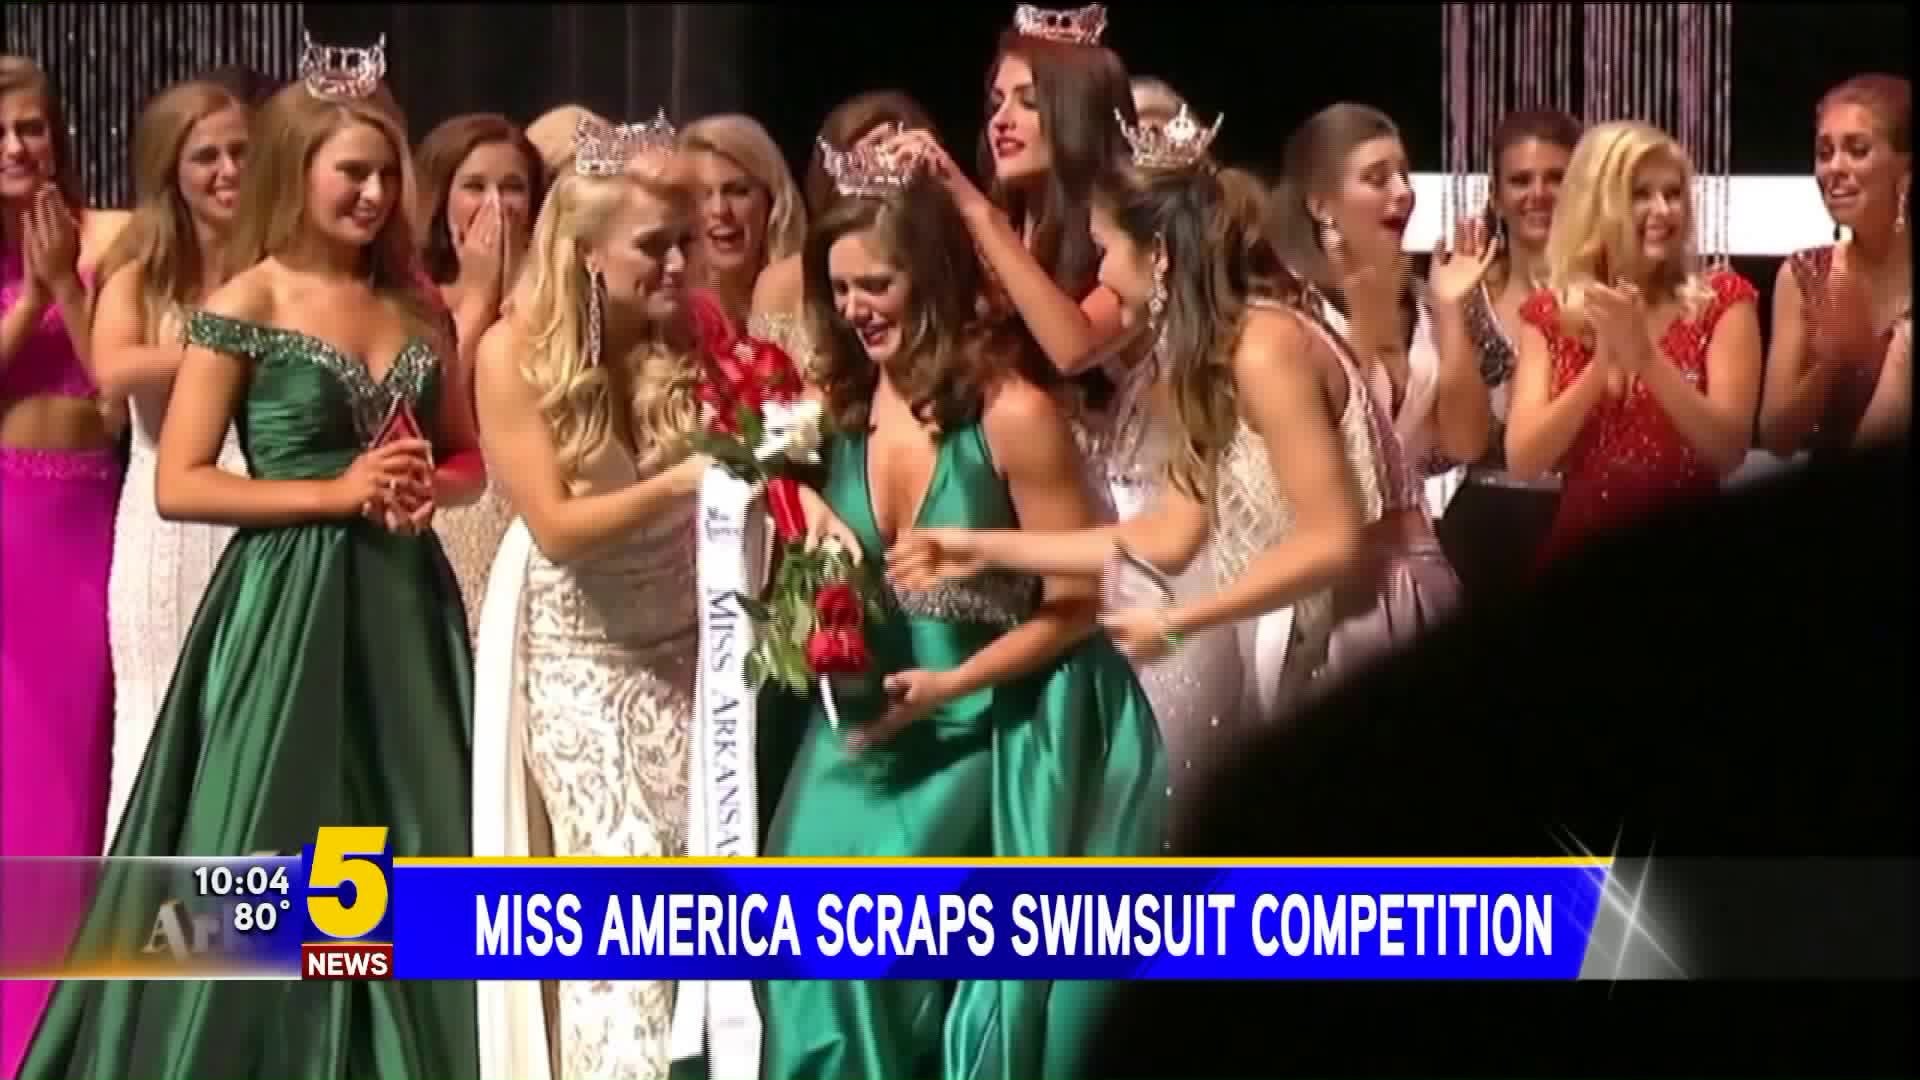 MISS AMERICA MAKES CHANGES TO COMPETITION